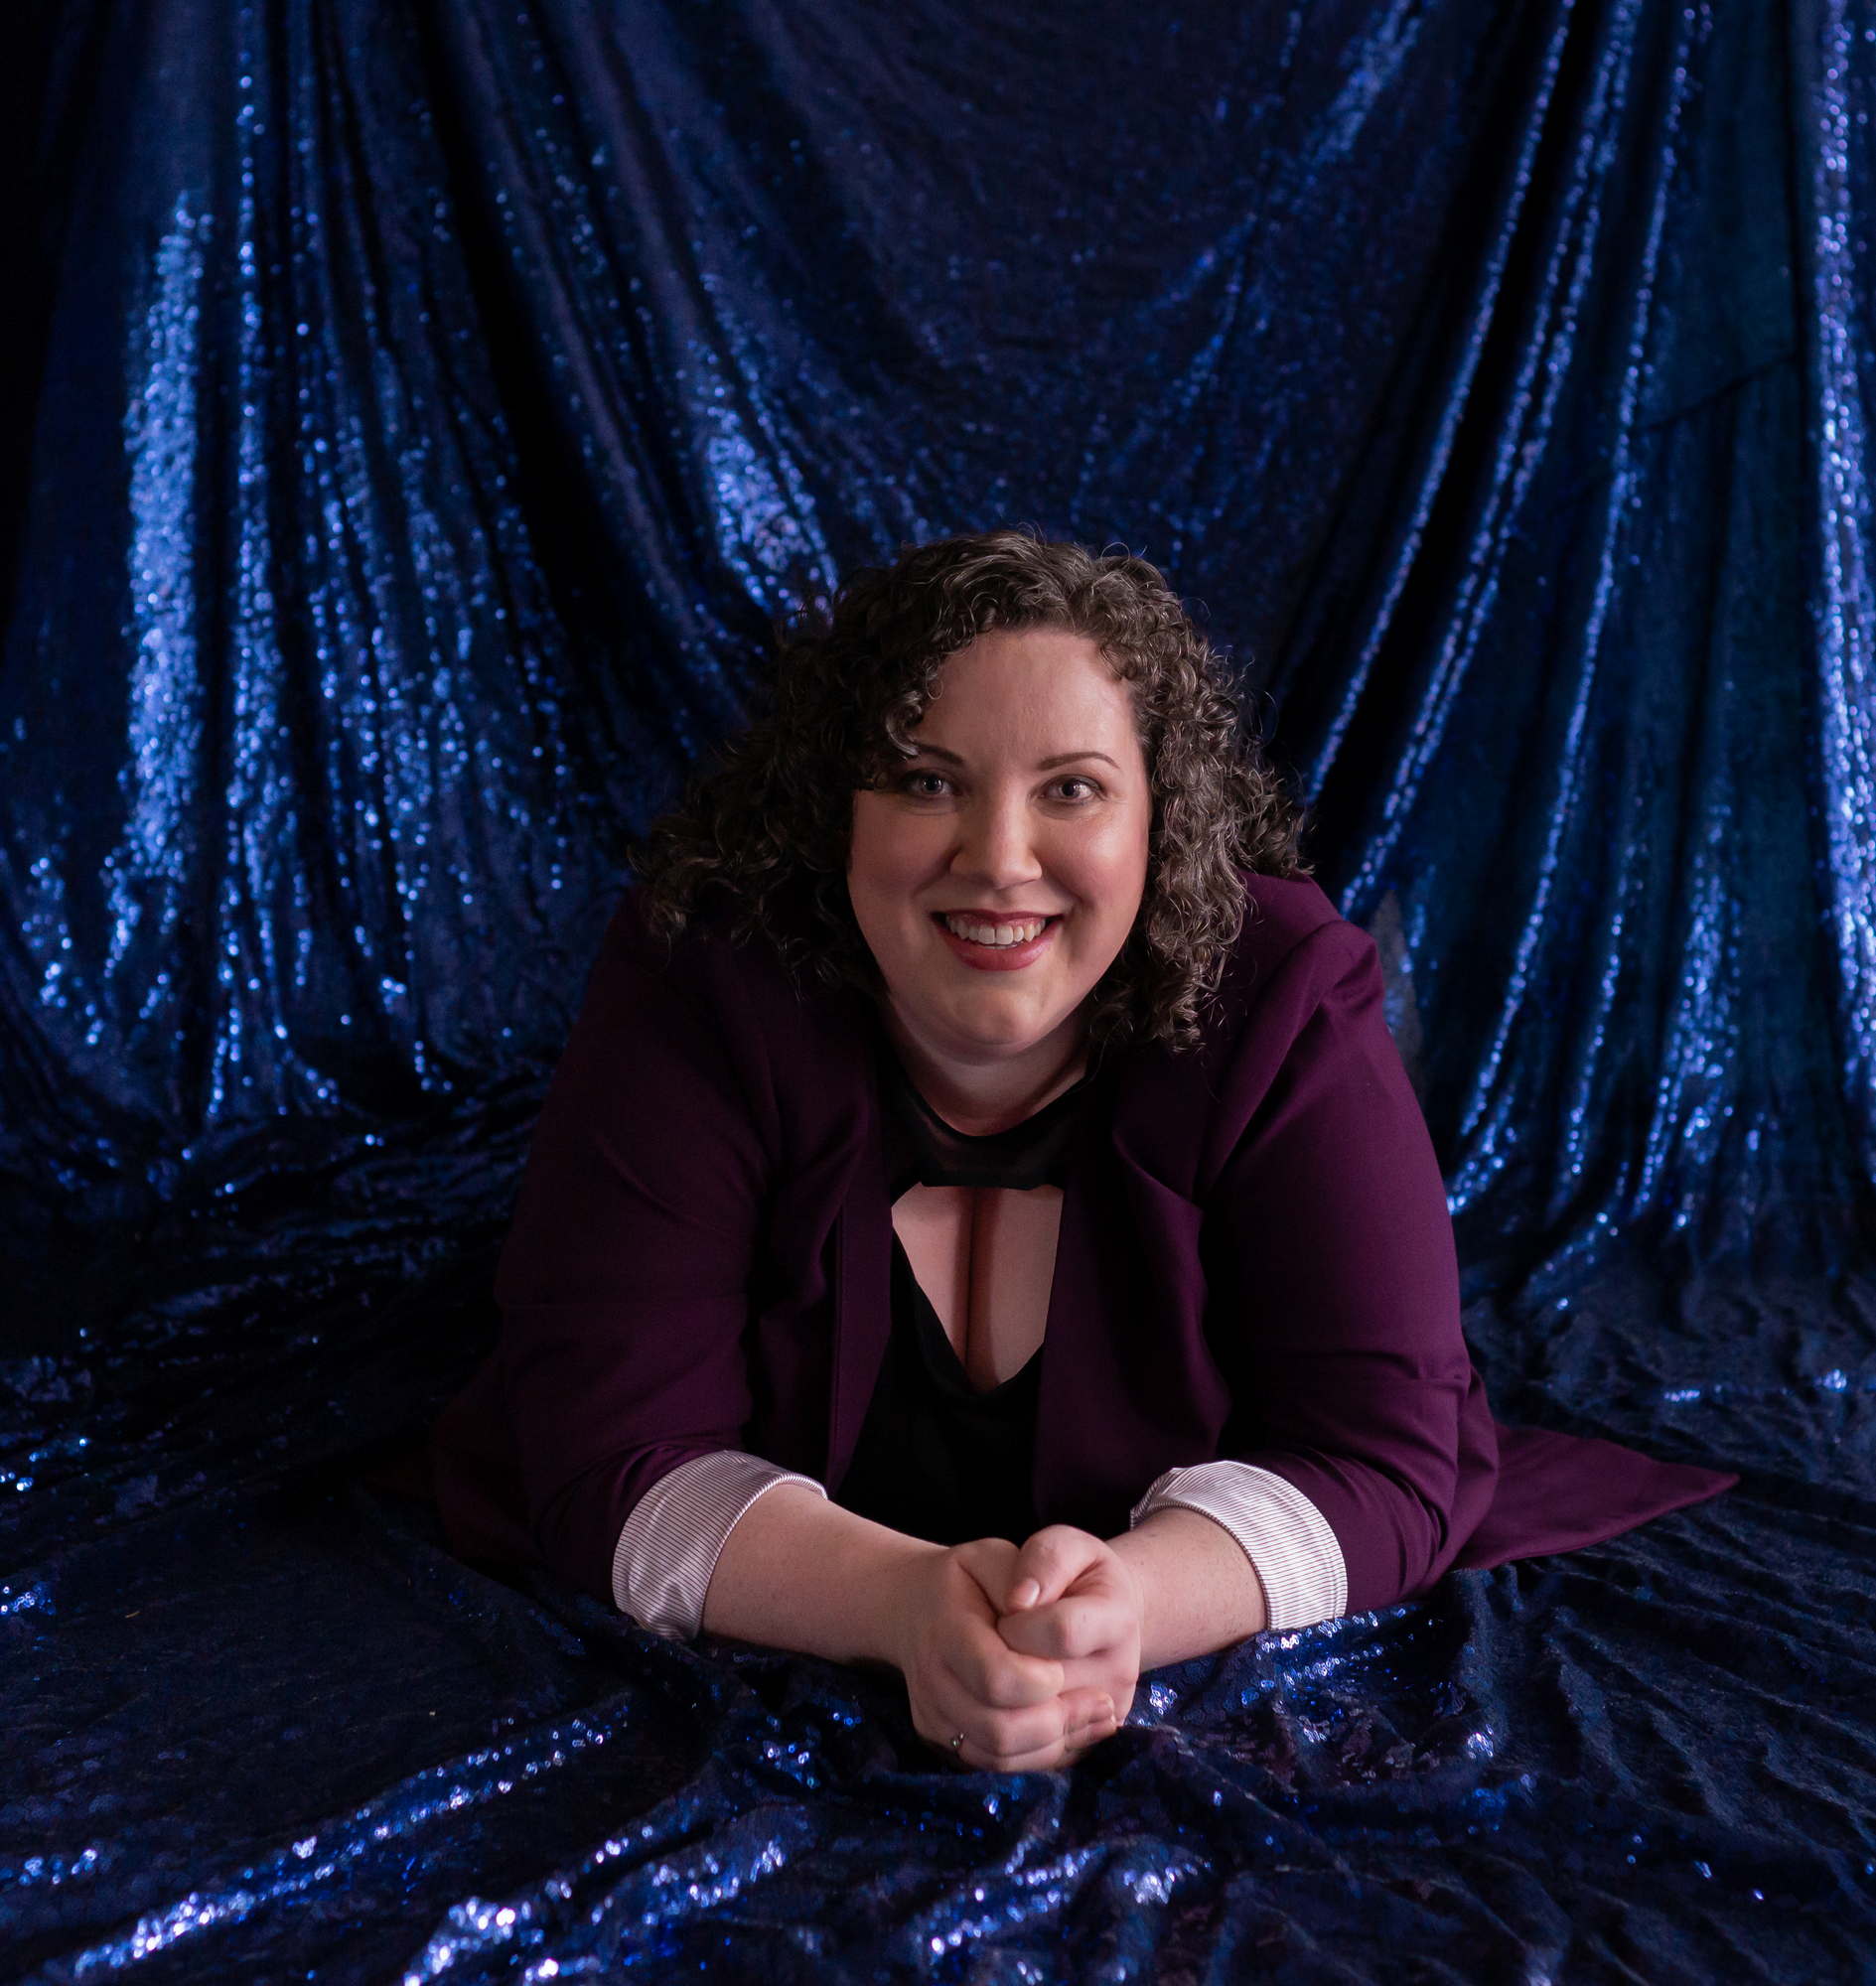 A fat woman in a purple blouse smiles confidently against a blue sequin background